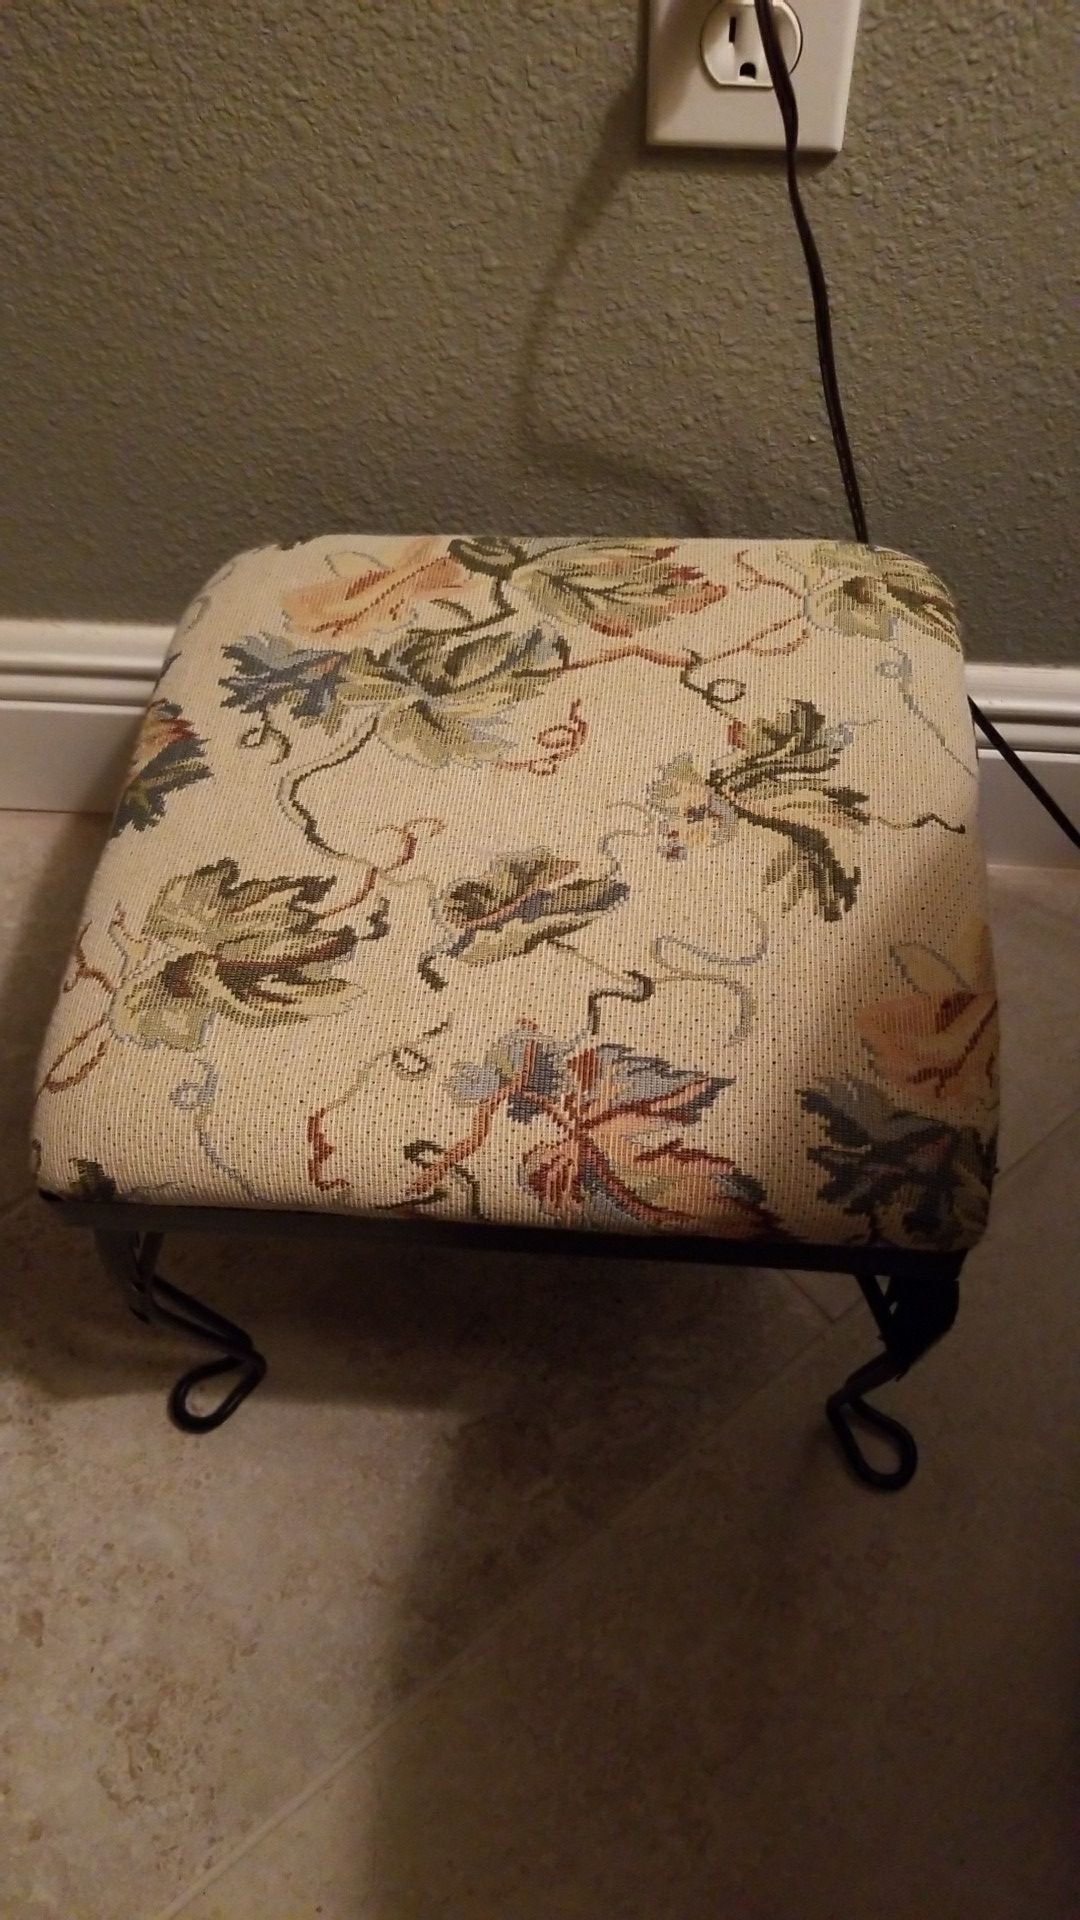 Antique foot stool with metal legs